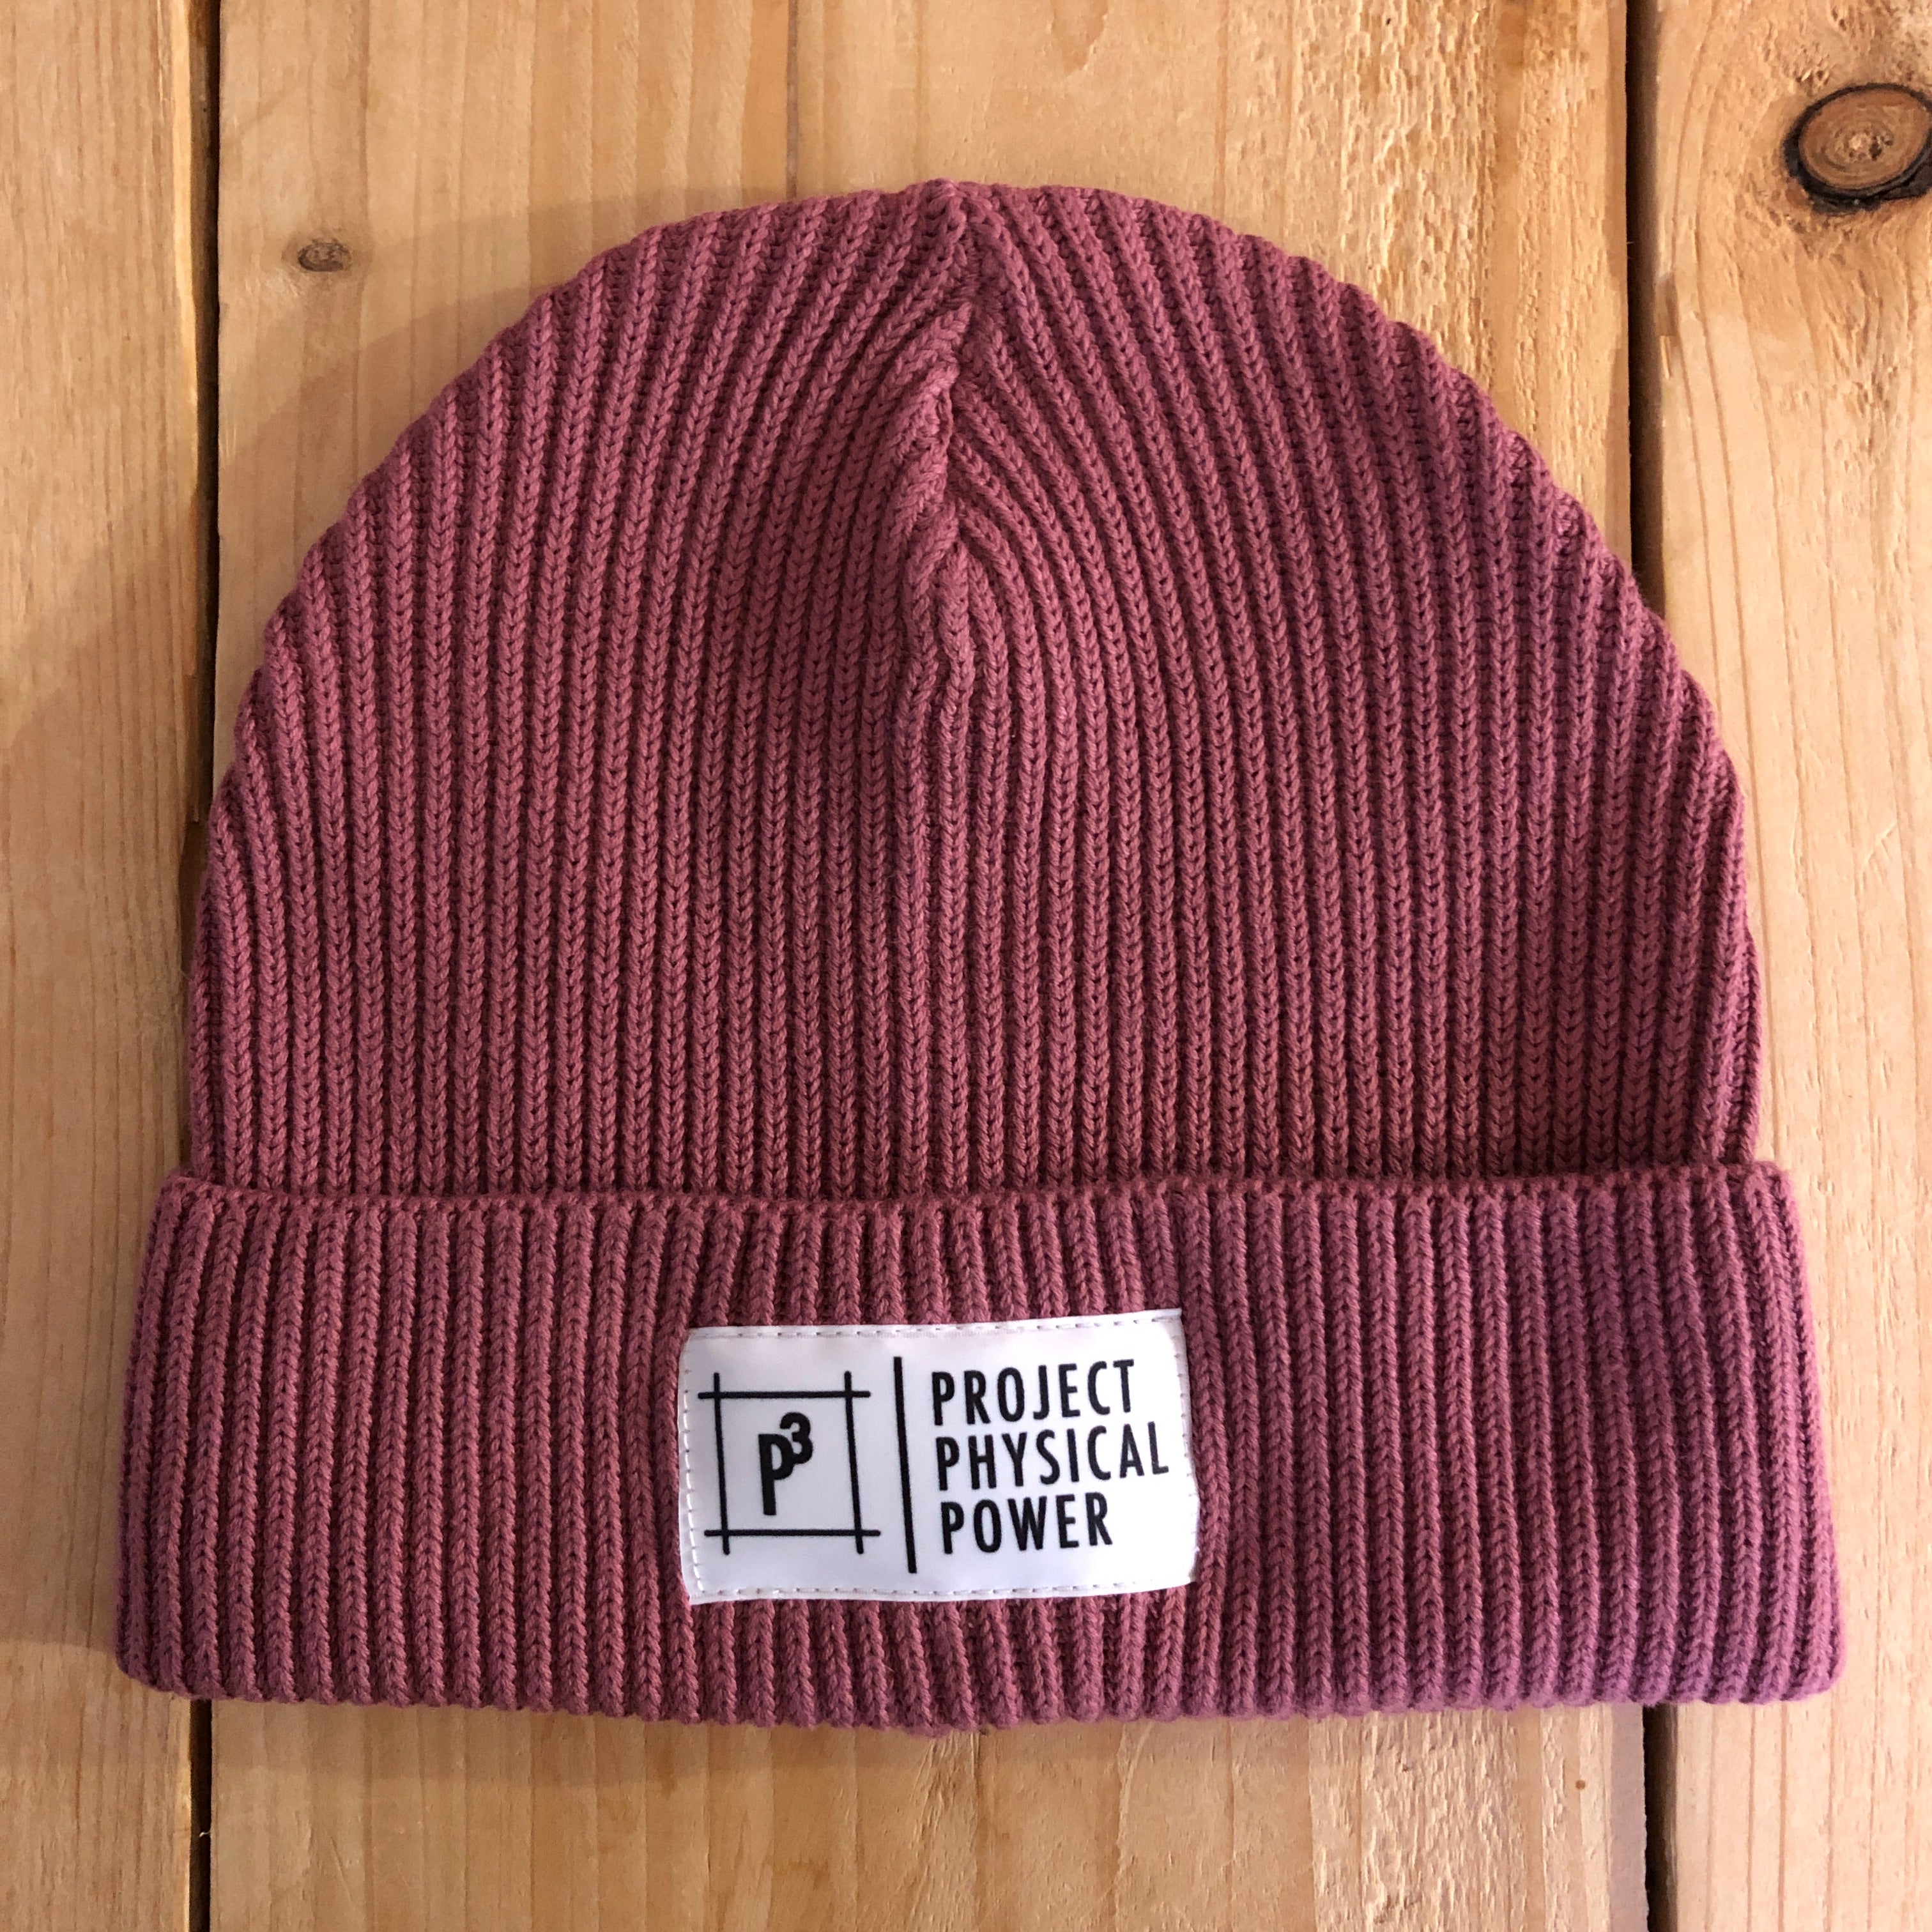 Project Physical Power - P3 Beanie